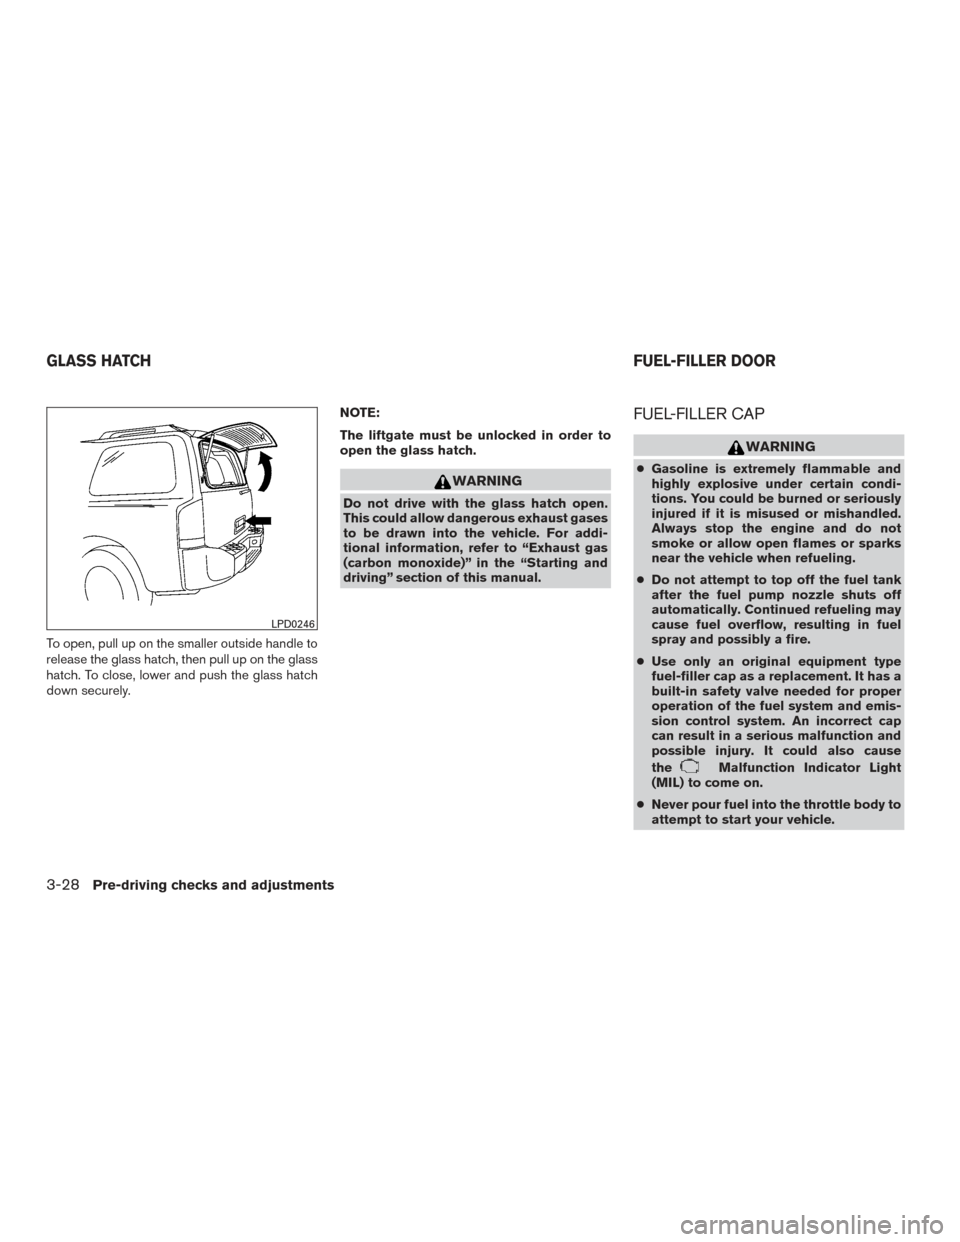 NISSAN ARMADA 2015 1.G Owners Guide To open, pull up on the smaller outside handle to
release the glass hatch, then pull up on the glass
hatch. To close, lower and push the glass hatch
down securely.NOTE:
The liftgate must be unlocked i